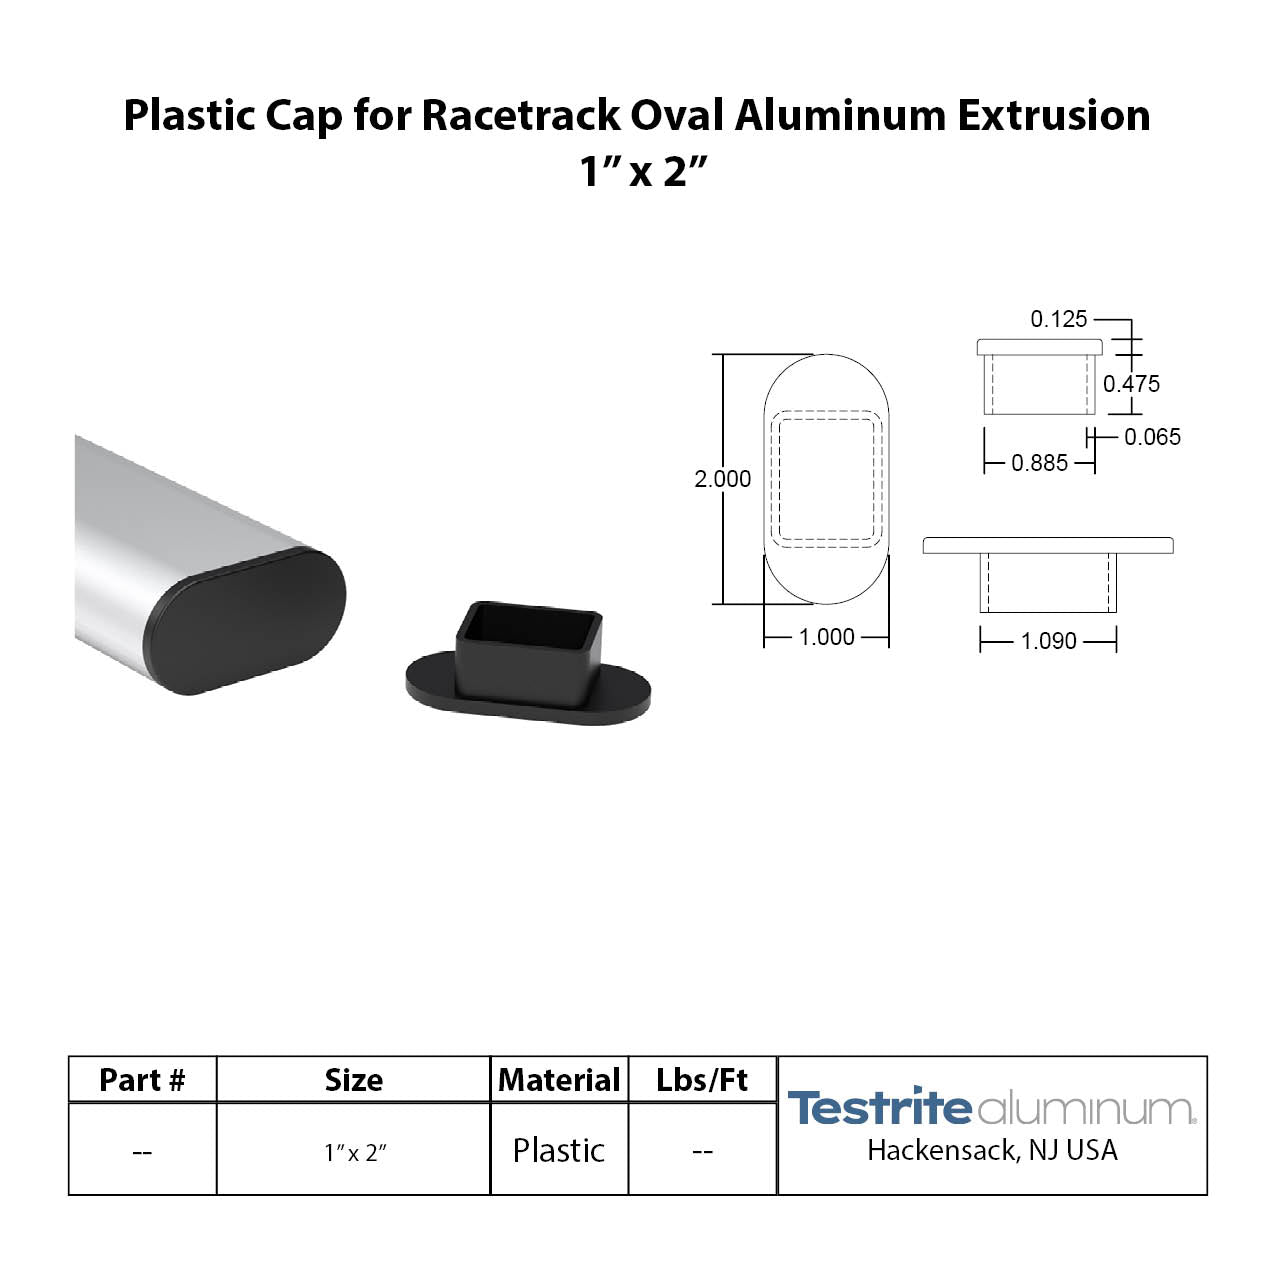 Plastic End cap for Racetrack Oval extrusion 1" x 2"